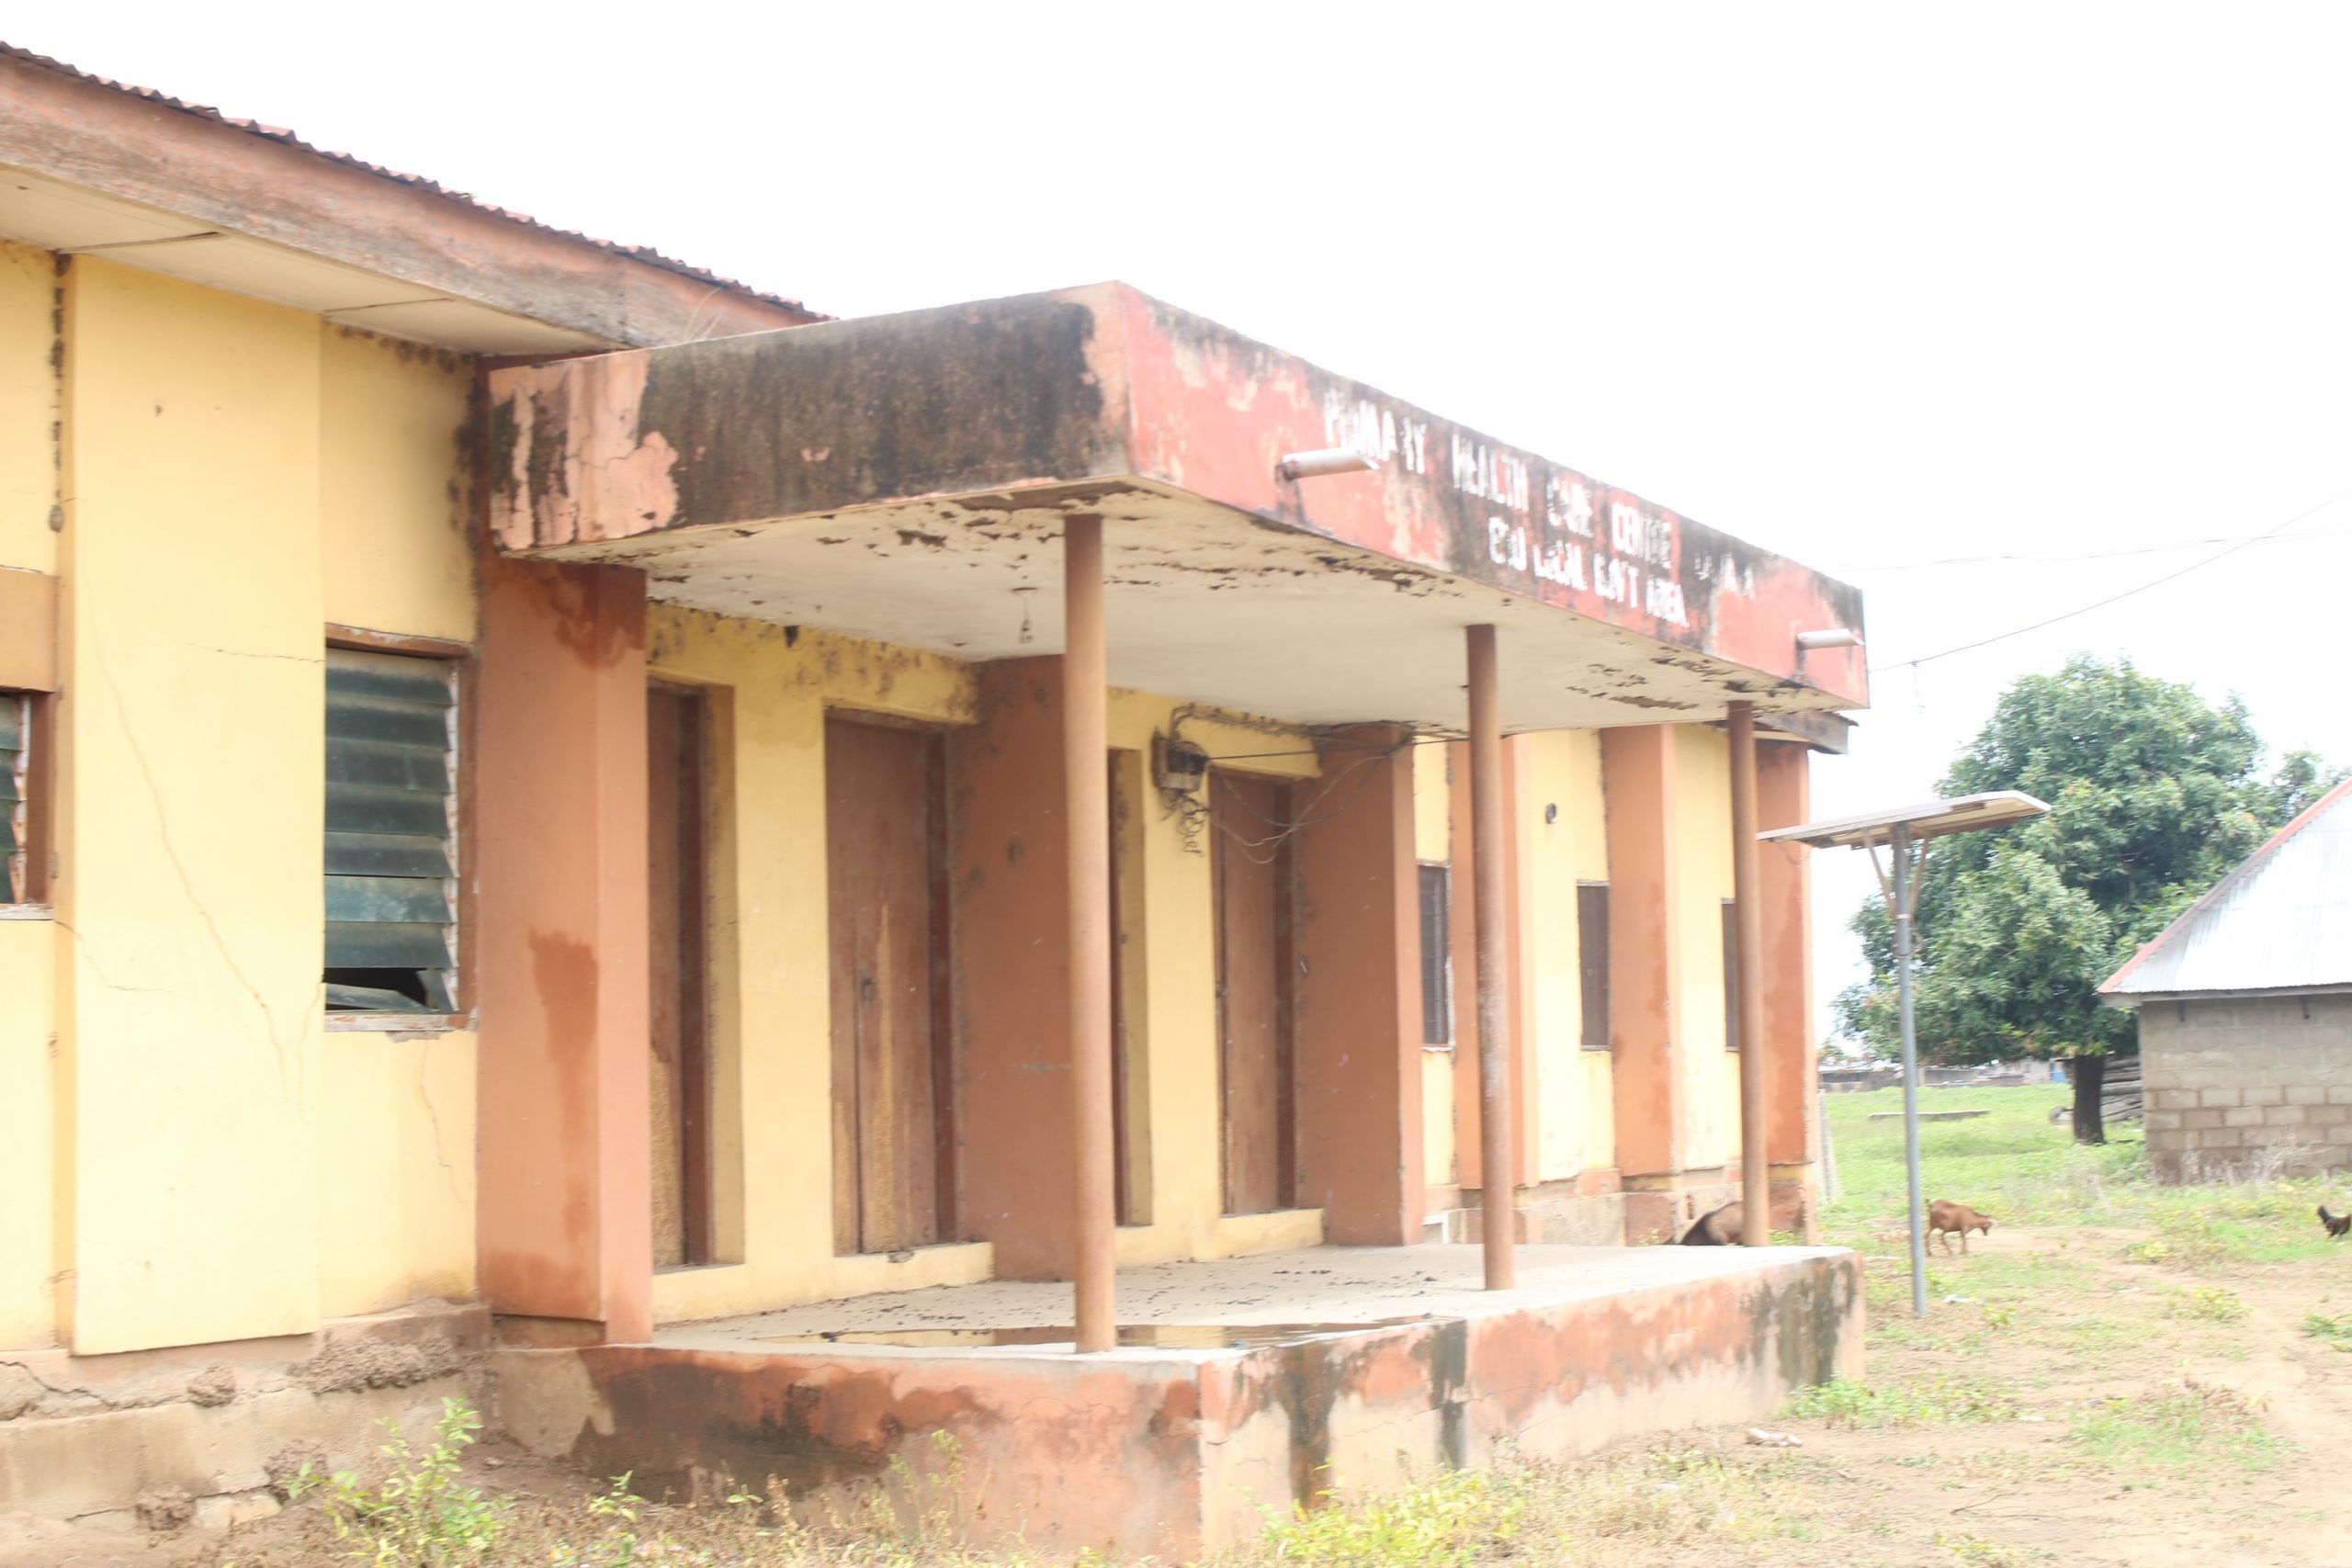 Nigeria’s Neglected Healthcare: Likpata’s Struggle and the Government’s Responsibility